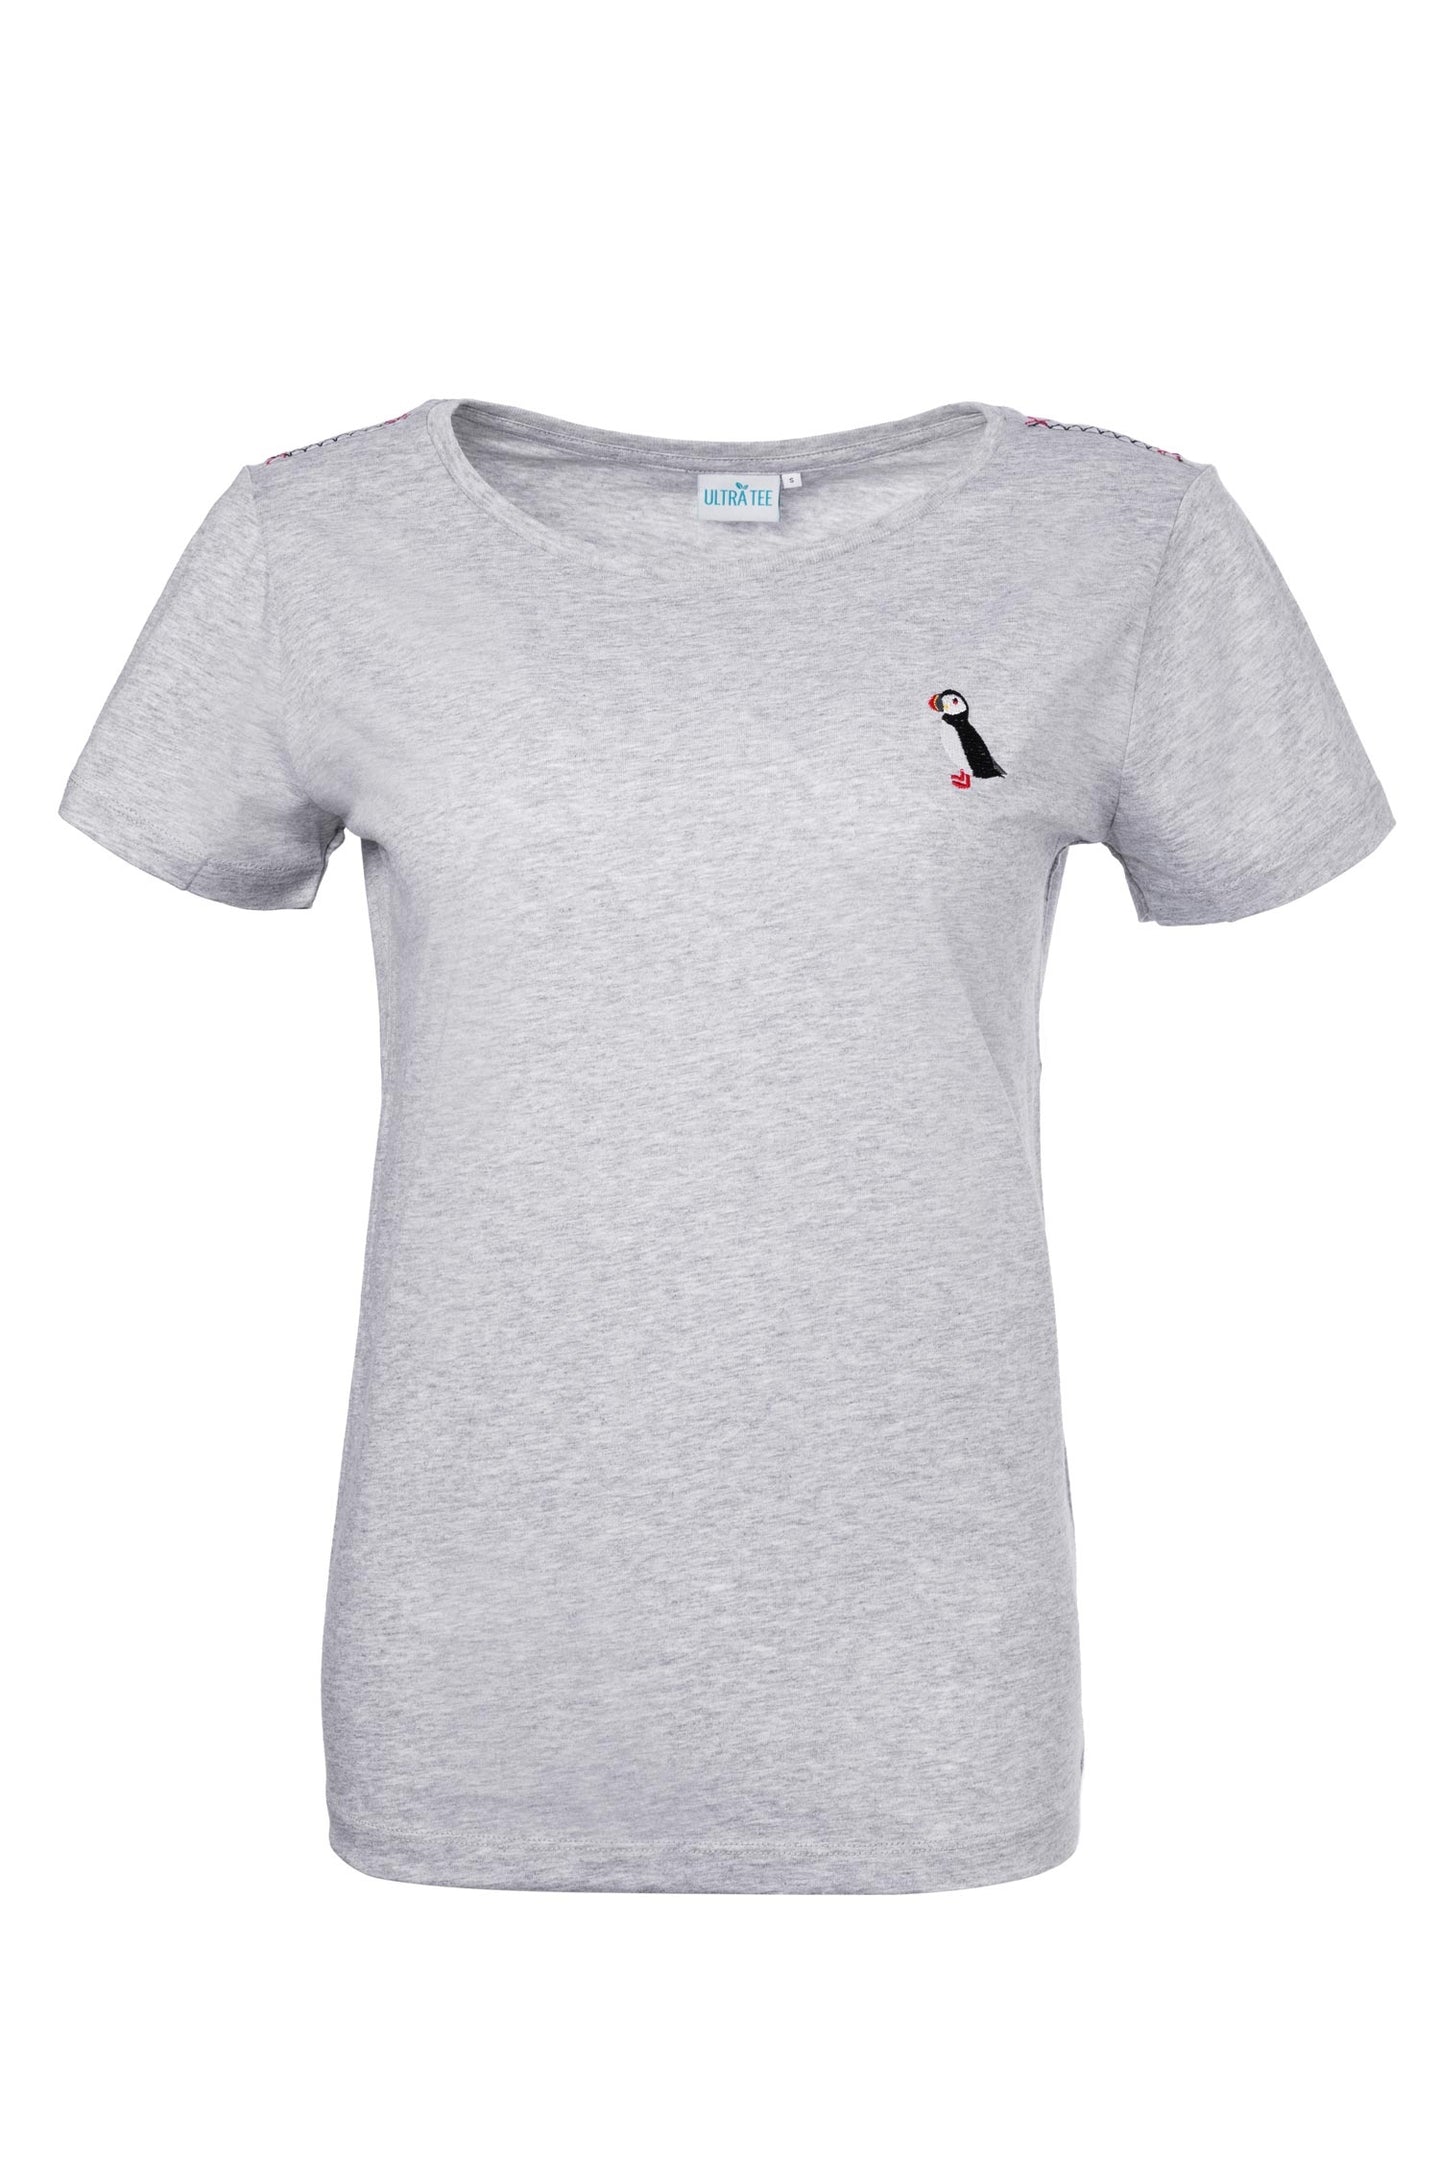 Puffin Embroidered T-shirt